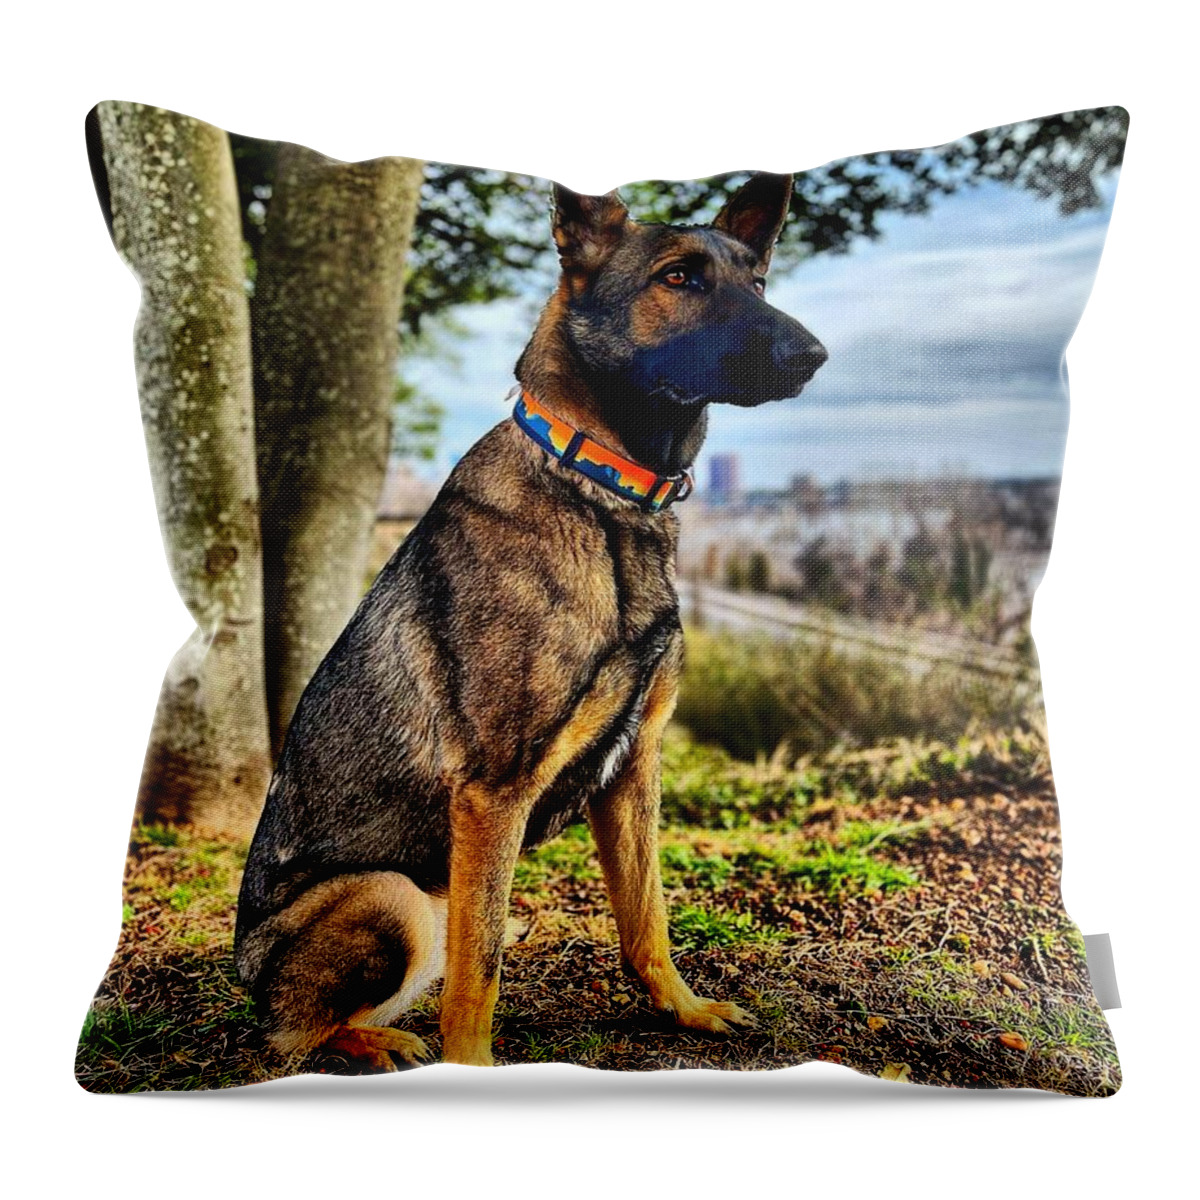  Throw Pillow featuring the photograph Watching by Stephen Dorton